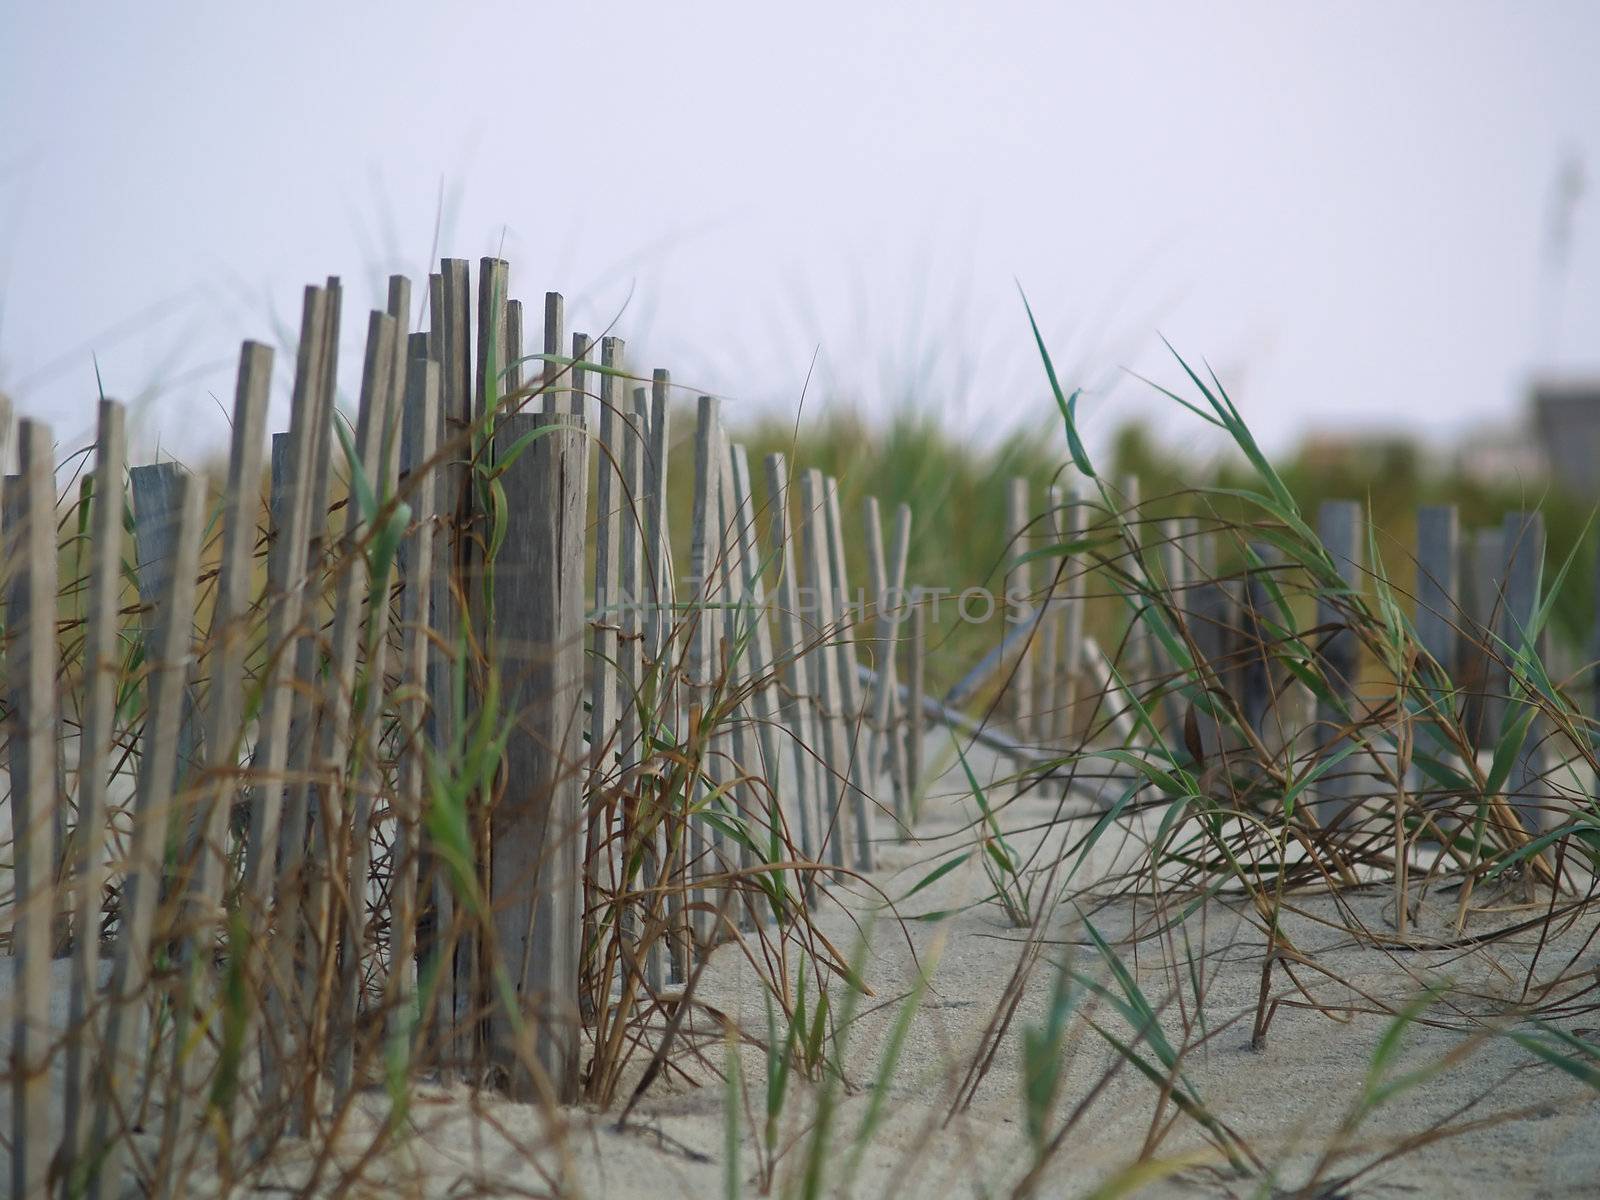 An old wooden dune fence in a sand dune with sea oats.